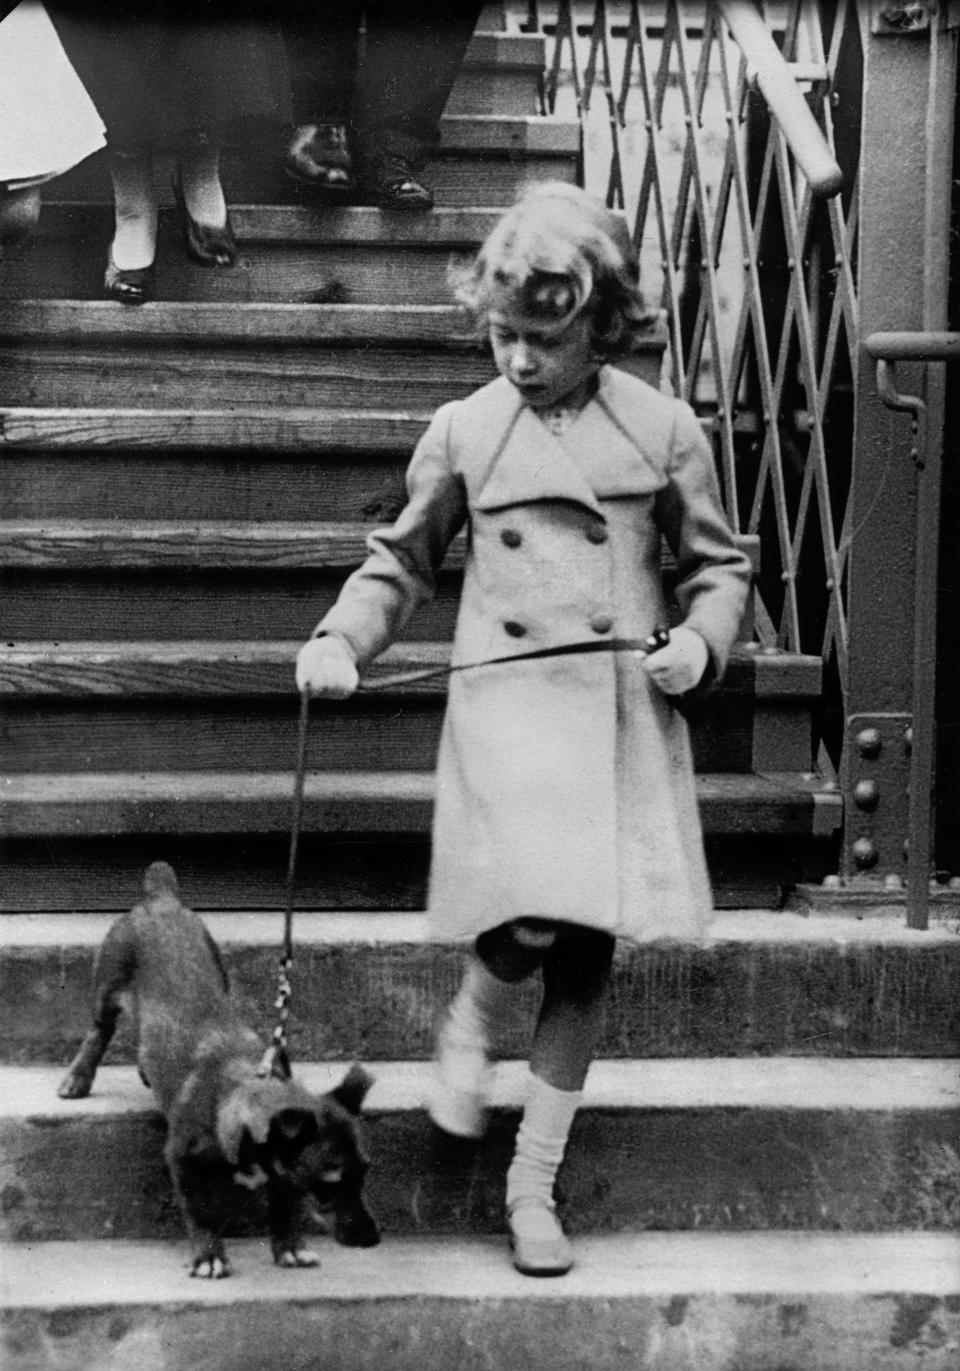 A five-year-old Queen took her dog for a walk in 1931 (Getty Images)